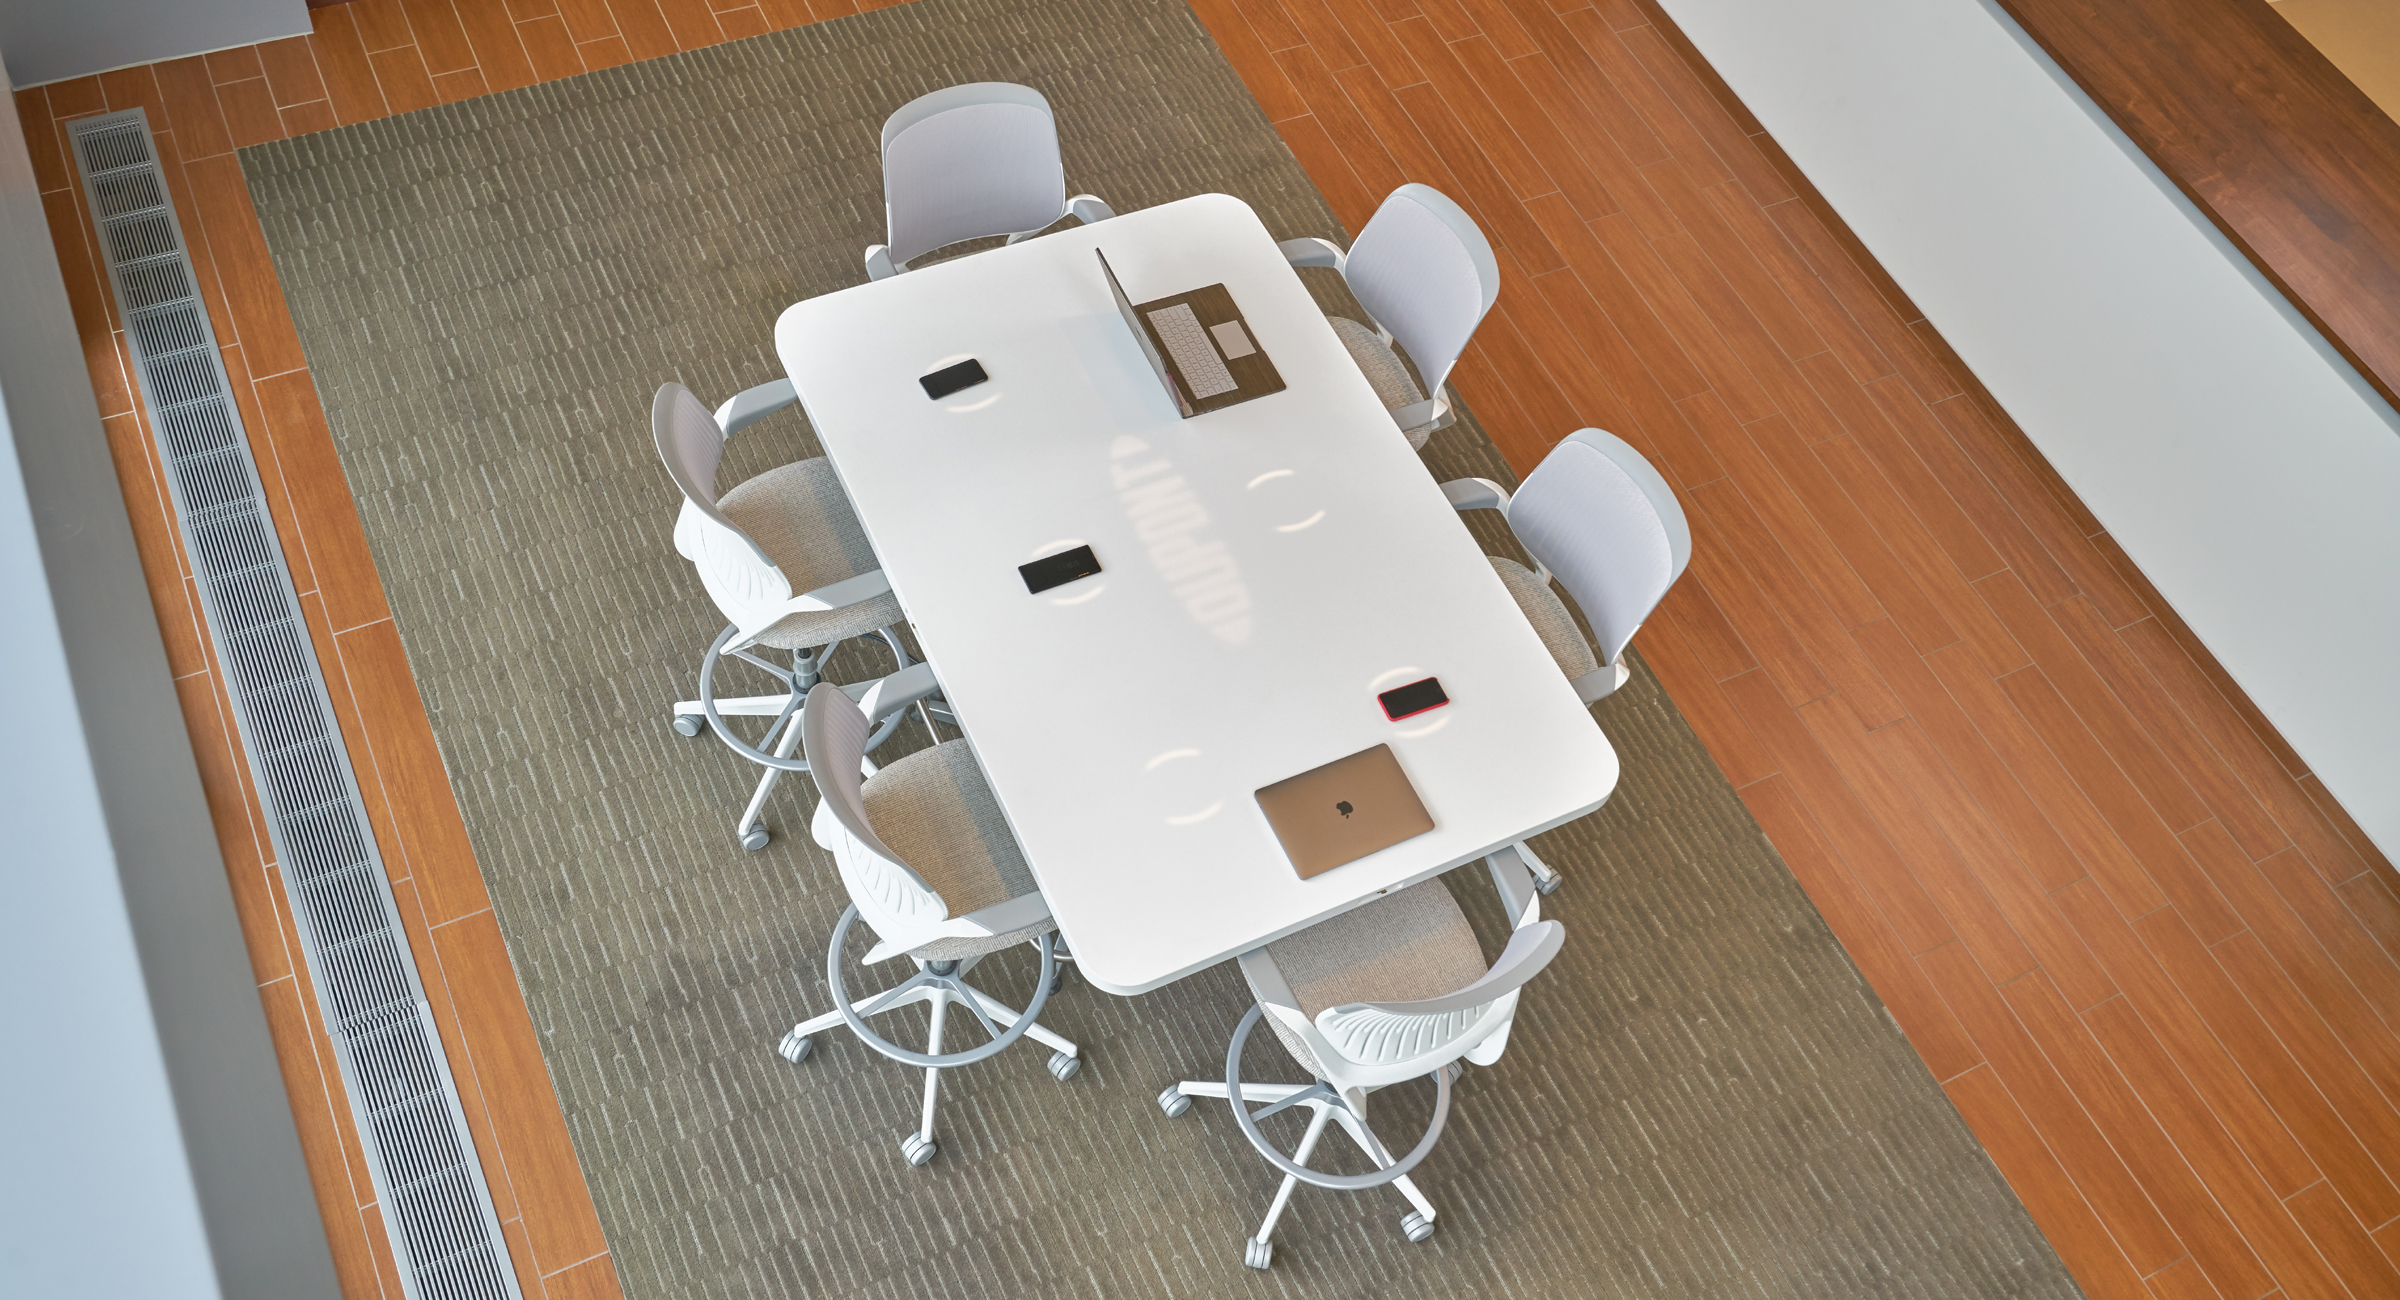 DuPont Smart Conference Table - Top View